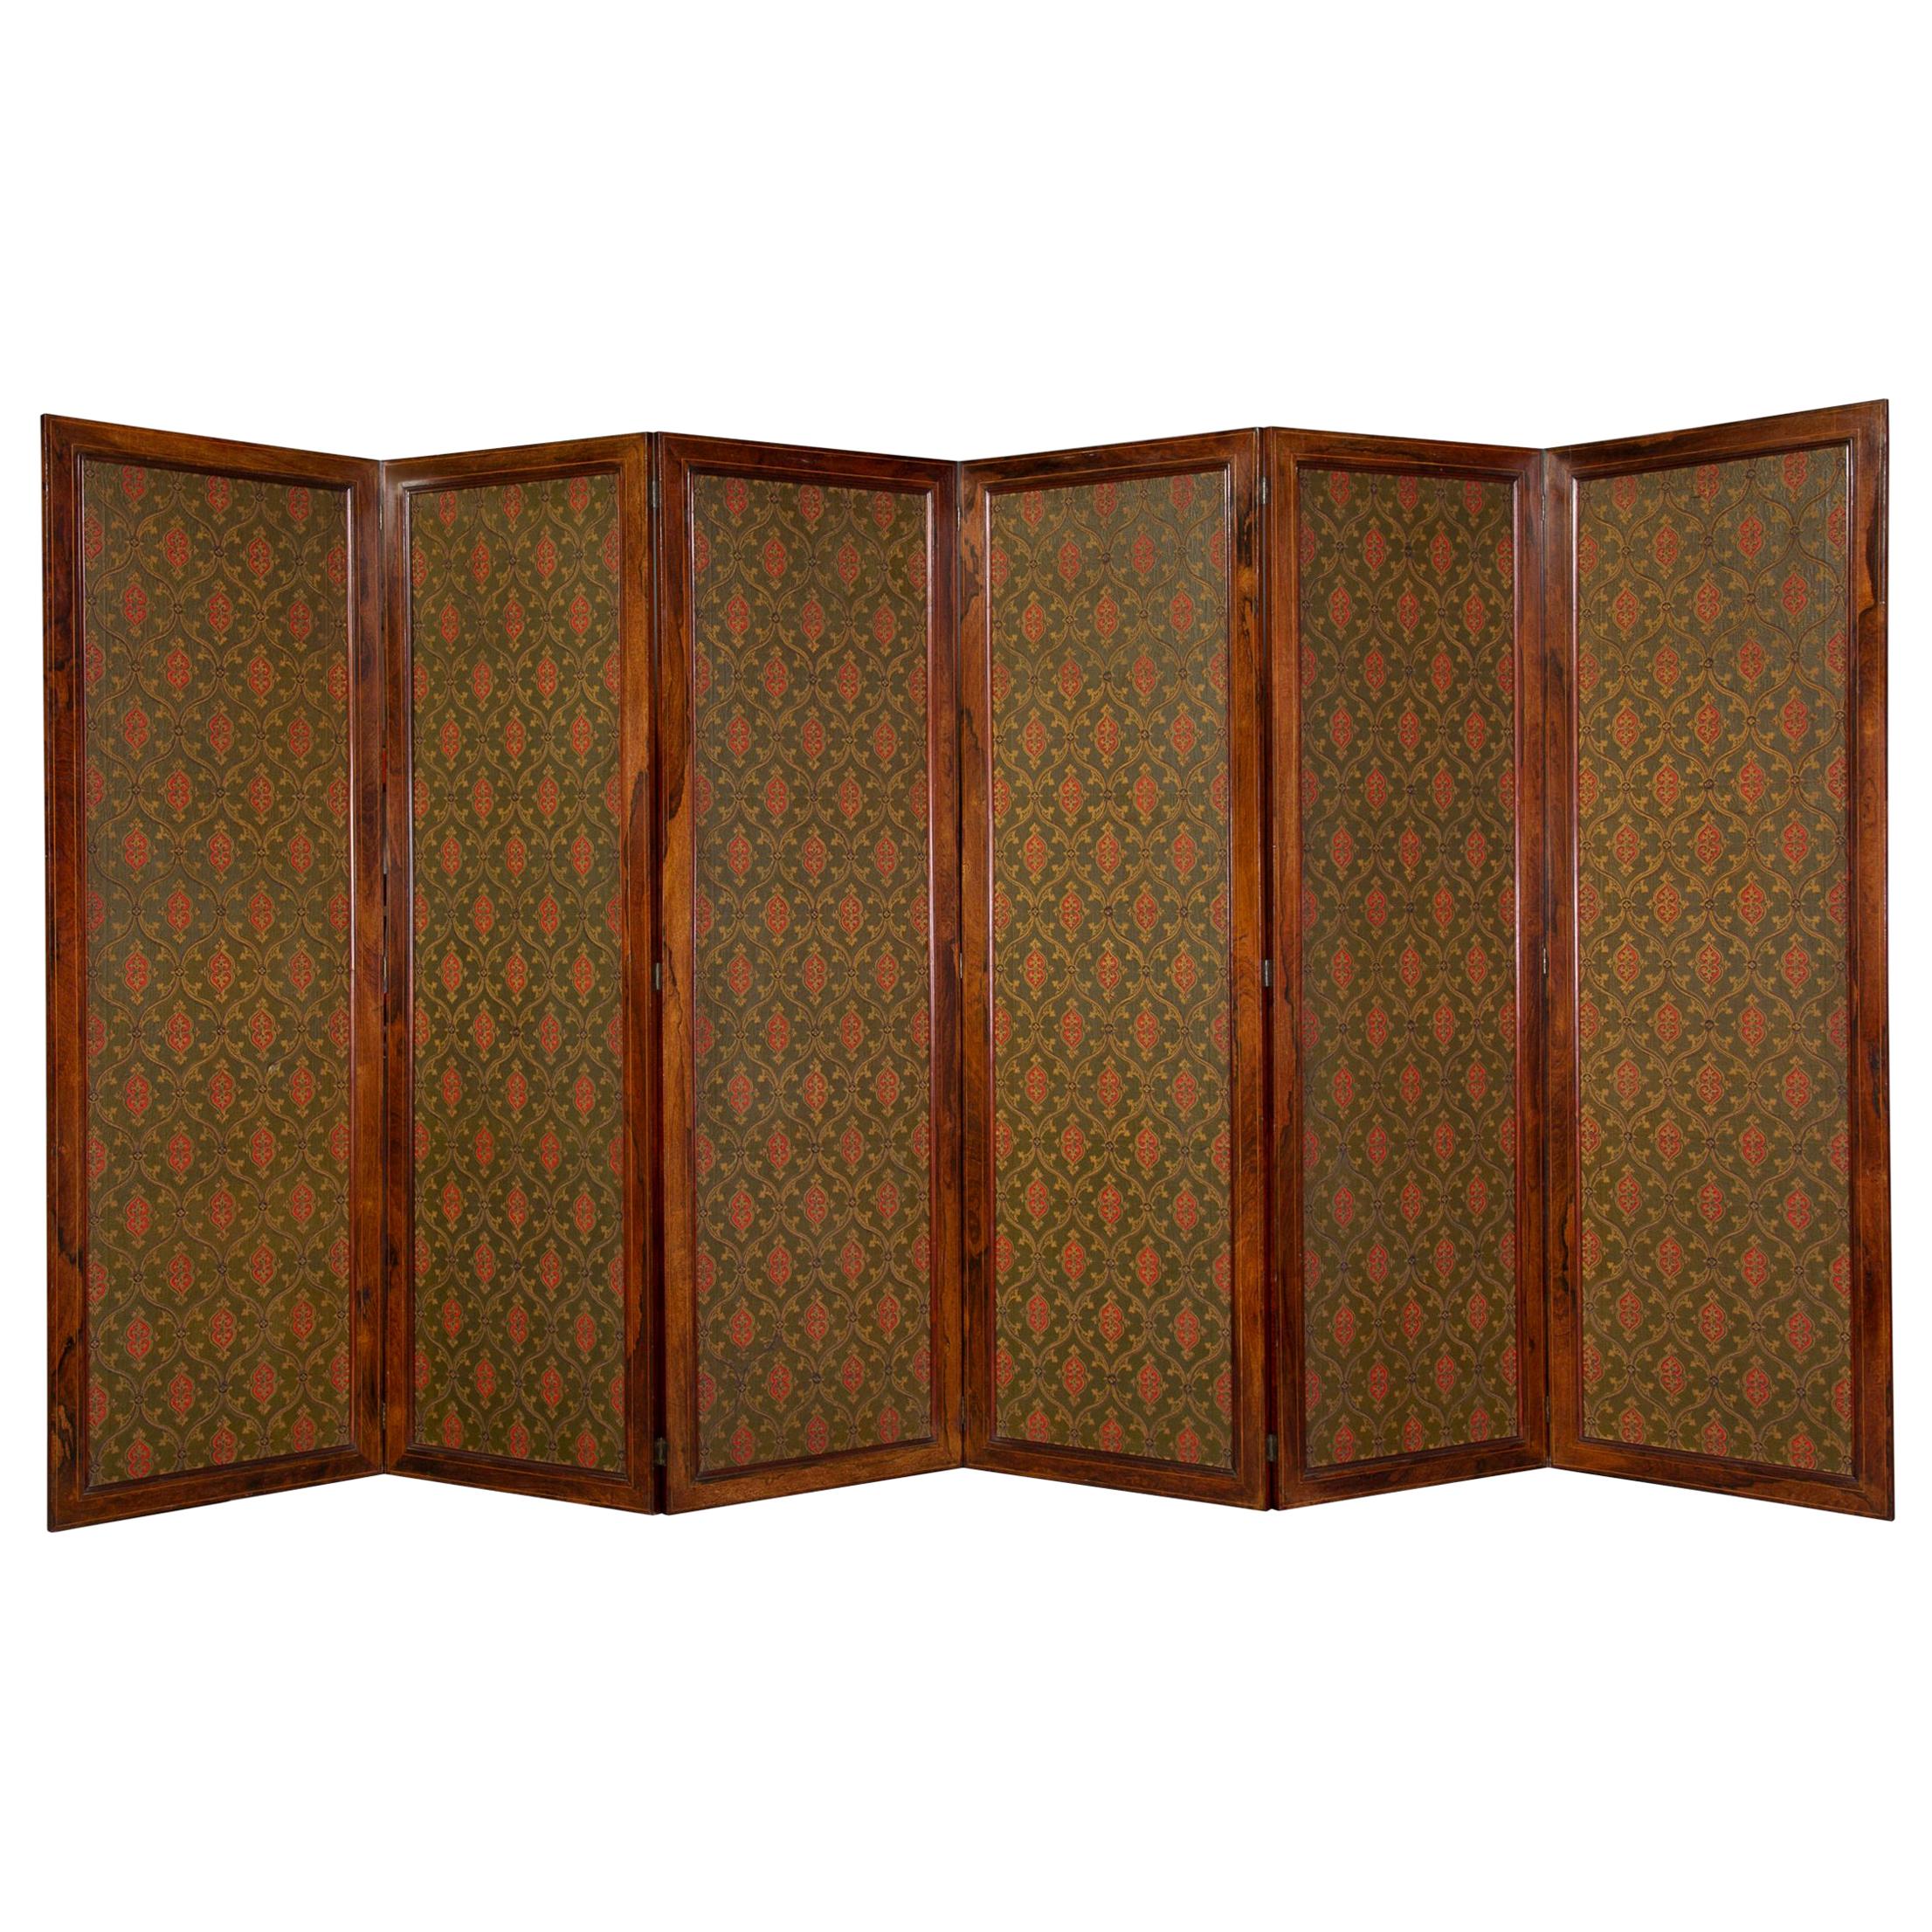 Fine Gothic Revival Six-Panel Screen after A.W.N. Pugin For Sale